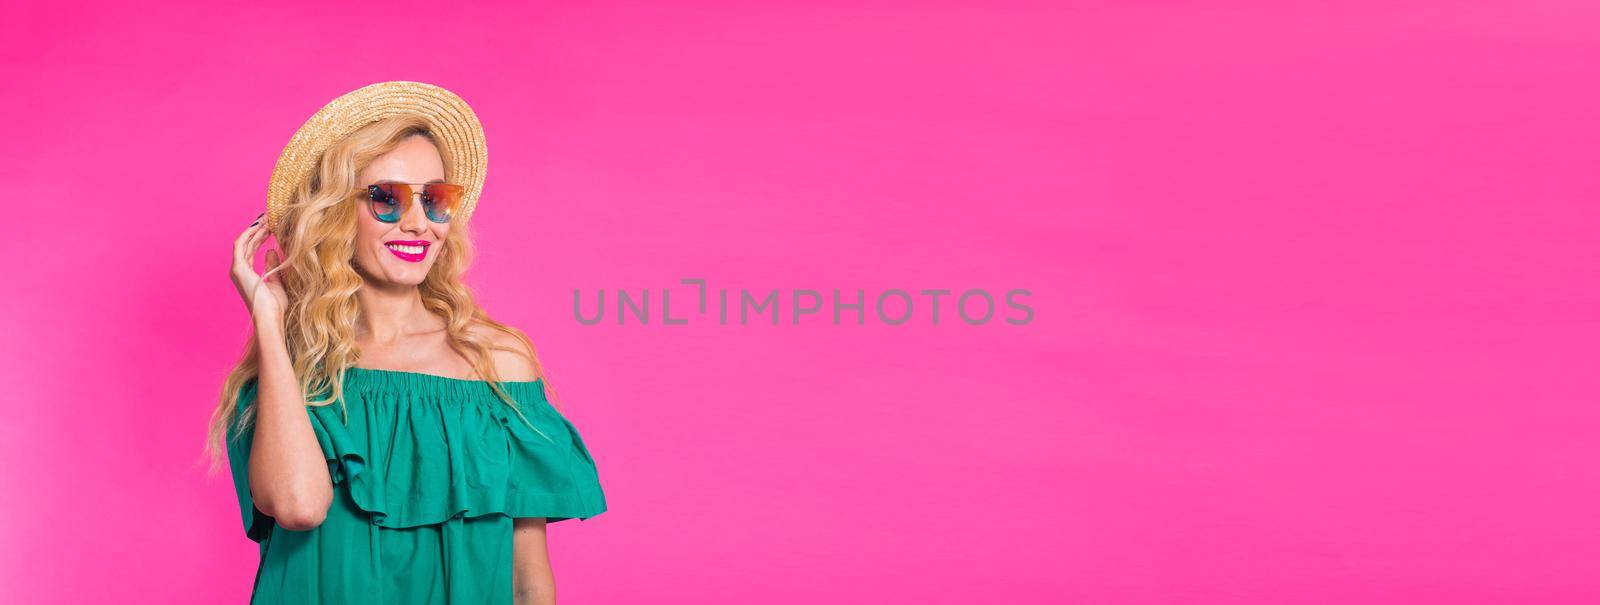 Fashion studio portrait of glamour girl, stylish clothes sunglasses banner pink background with copyspace by Satura86